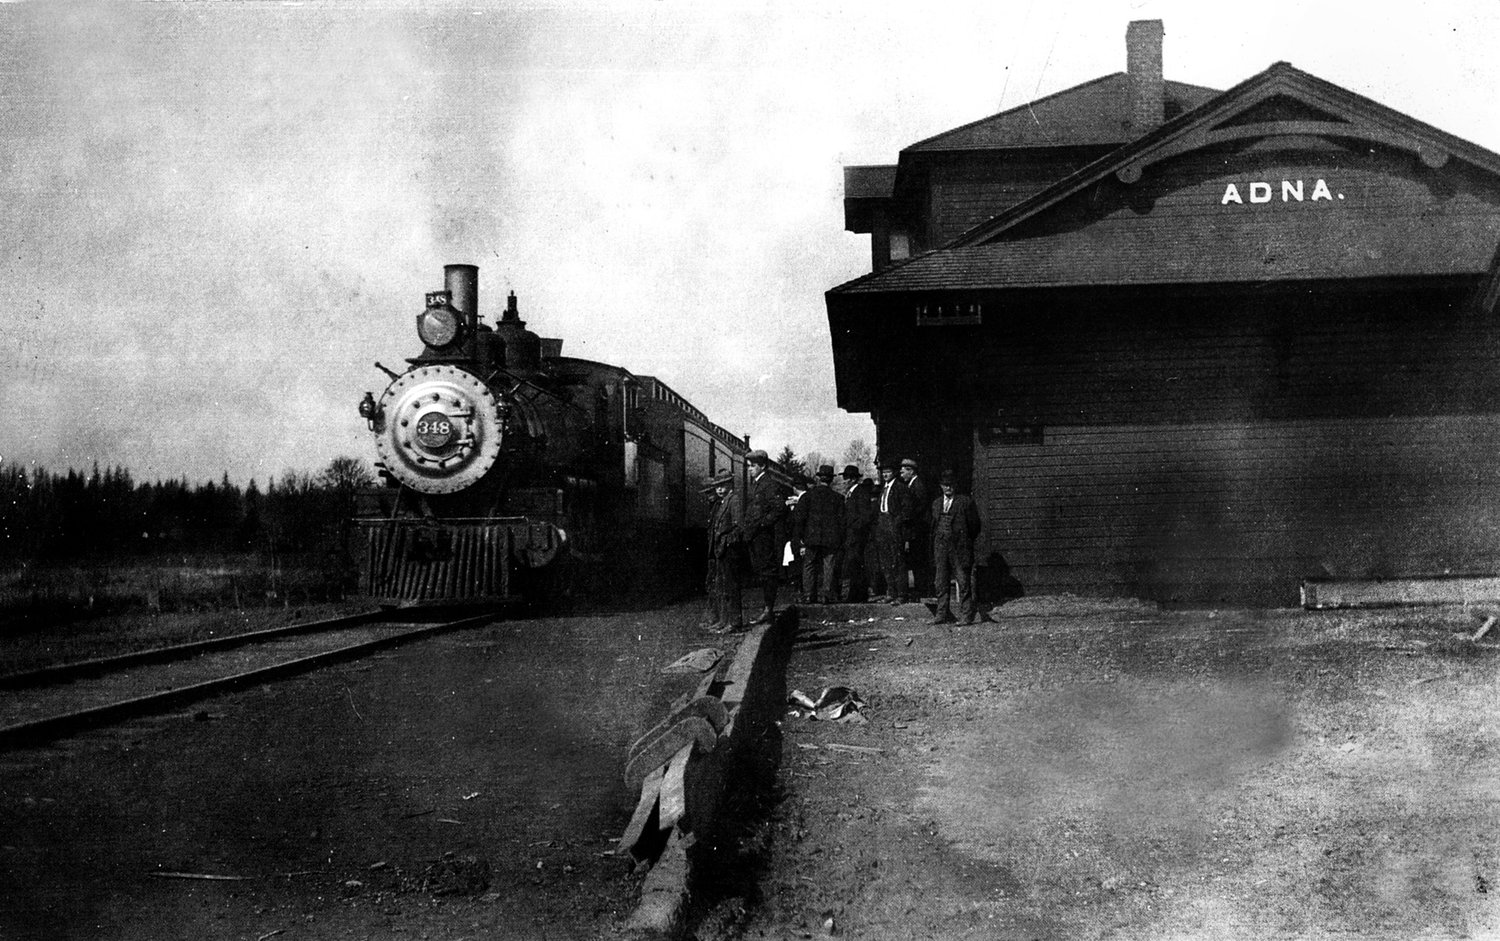 The Adna Railroad Depot is shown in this 1911 photo. It was built in 1891 by Northern Pacific Railroad. A lot of logs were shipped on this line from Raymond and South Bend. It also served passengers as well. It is thought the depot was razed in the 1950s and before that it had been located at the foot of the Adna School hill on the west side of Dieckman Road. This photo and information was originally submitted by Lois Keen for The Chronicle's Our Hometowns books.